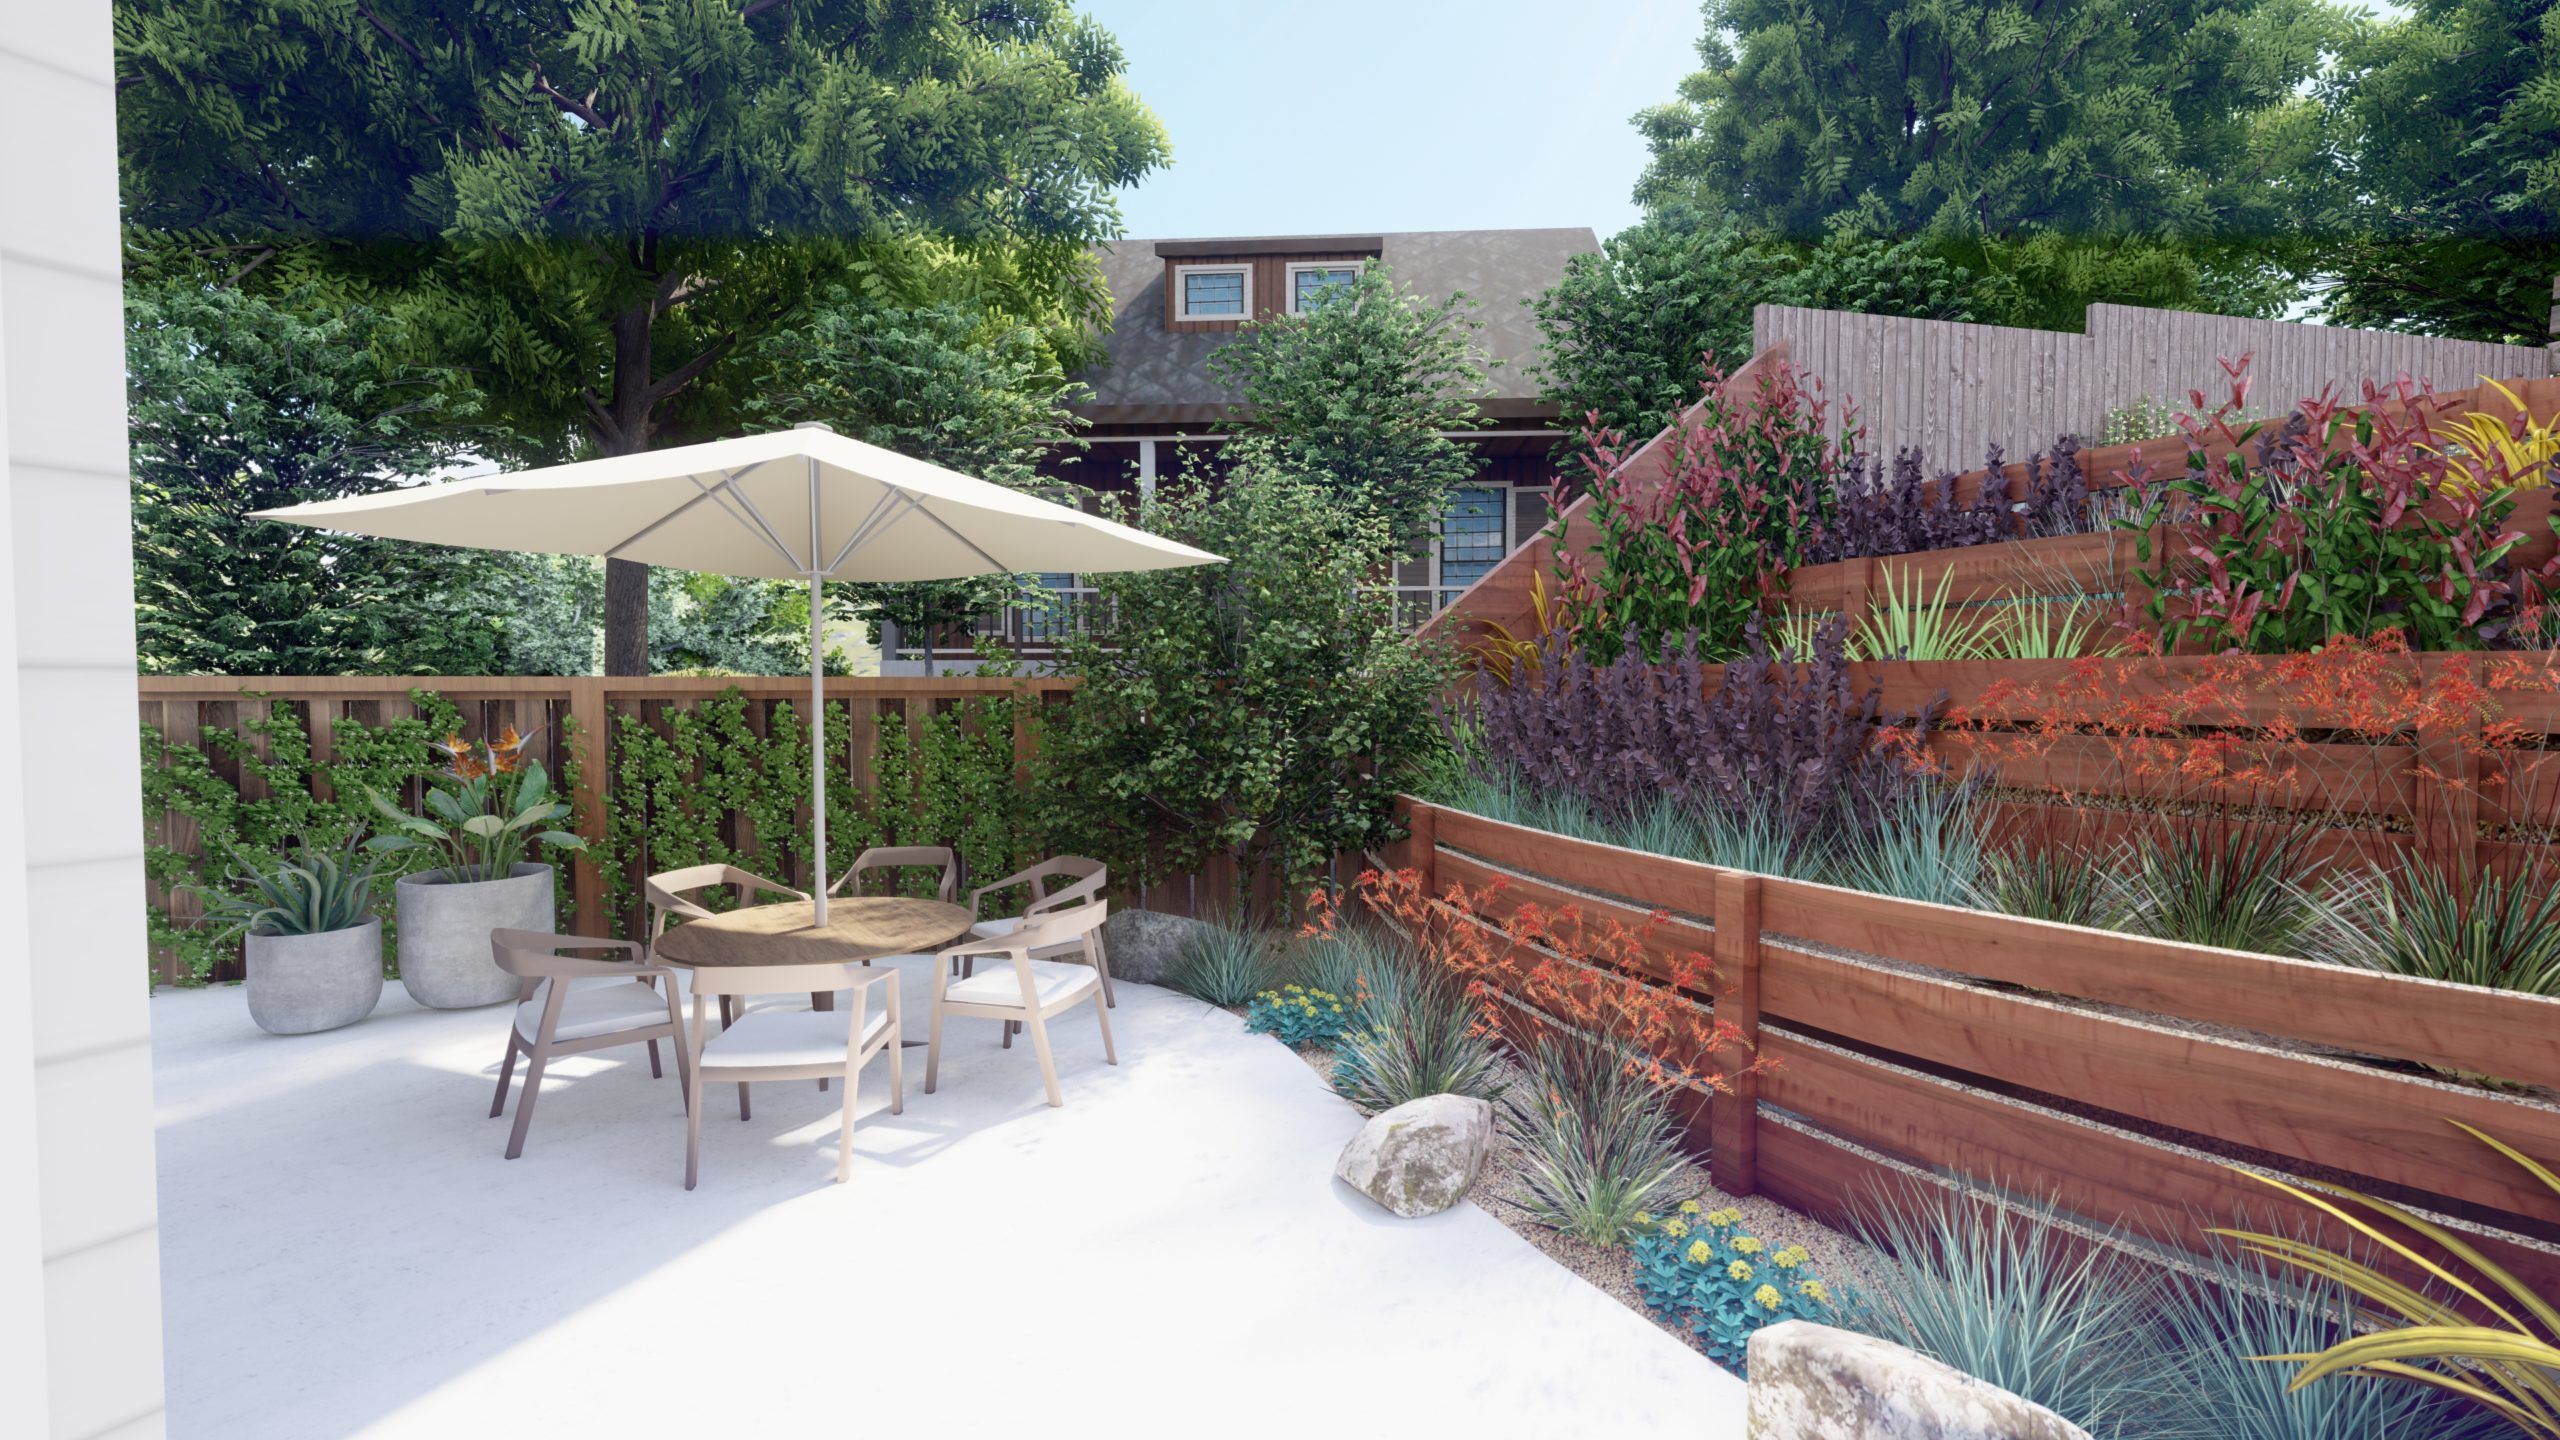 retaining walls with full gardens by an outdoor dining area